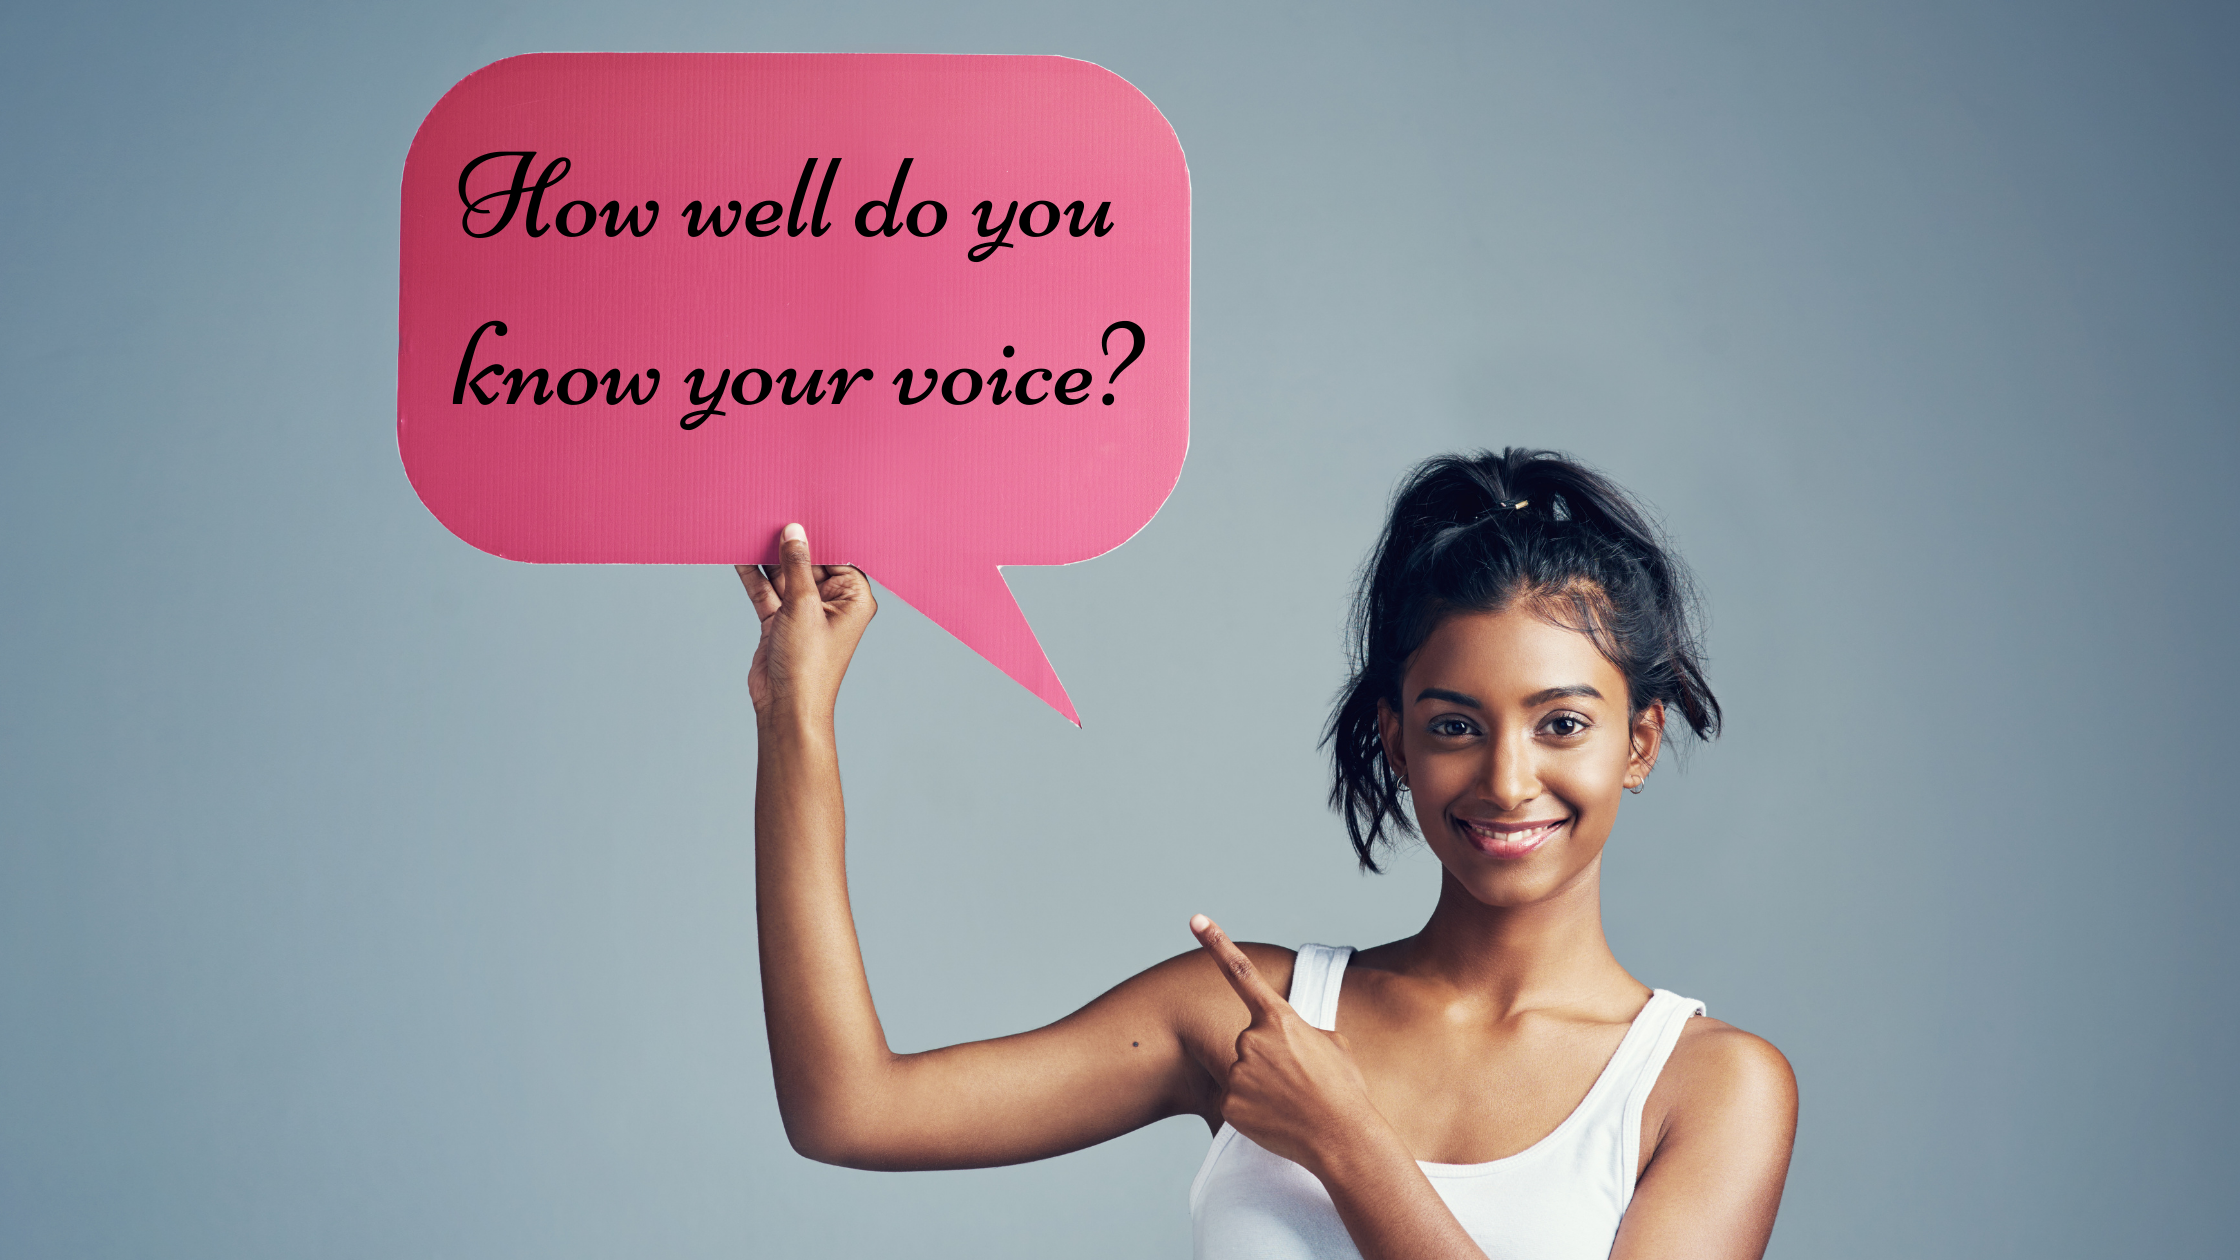 How well do you know your voice